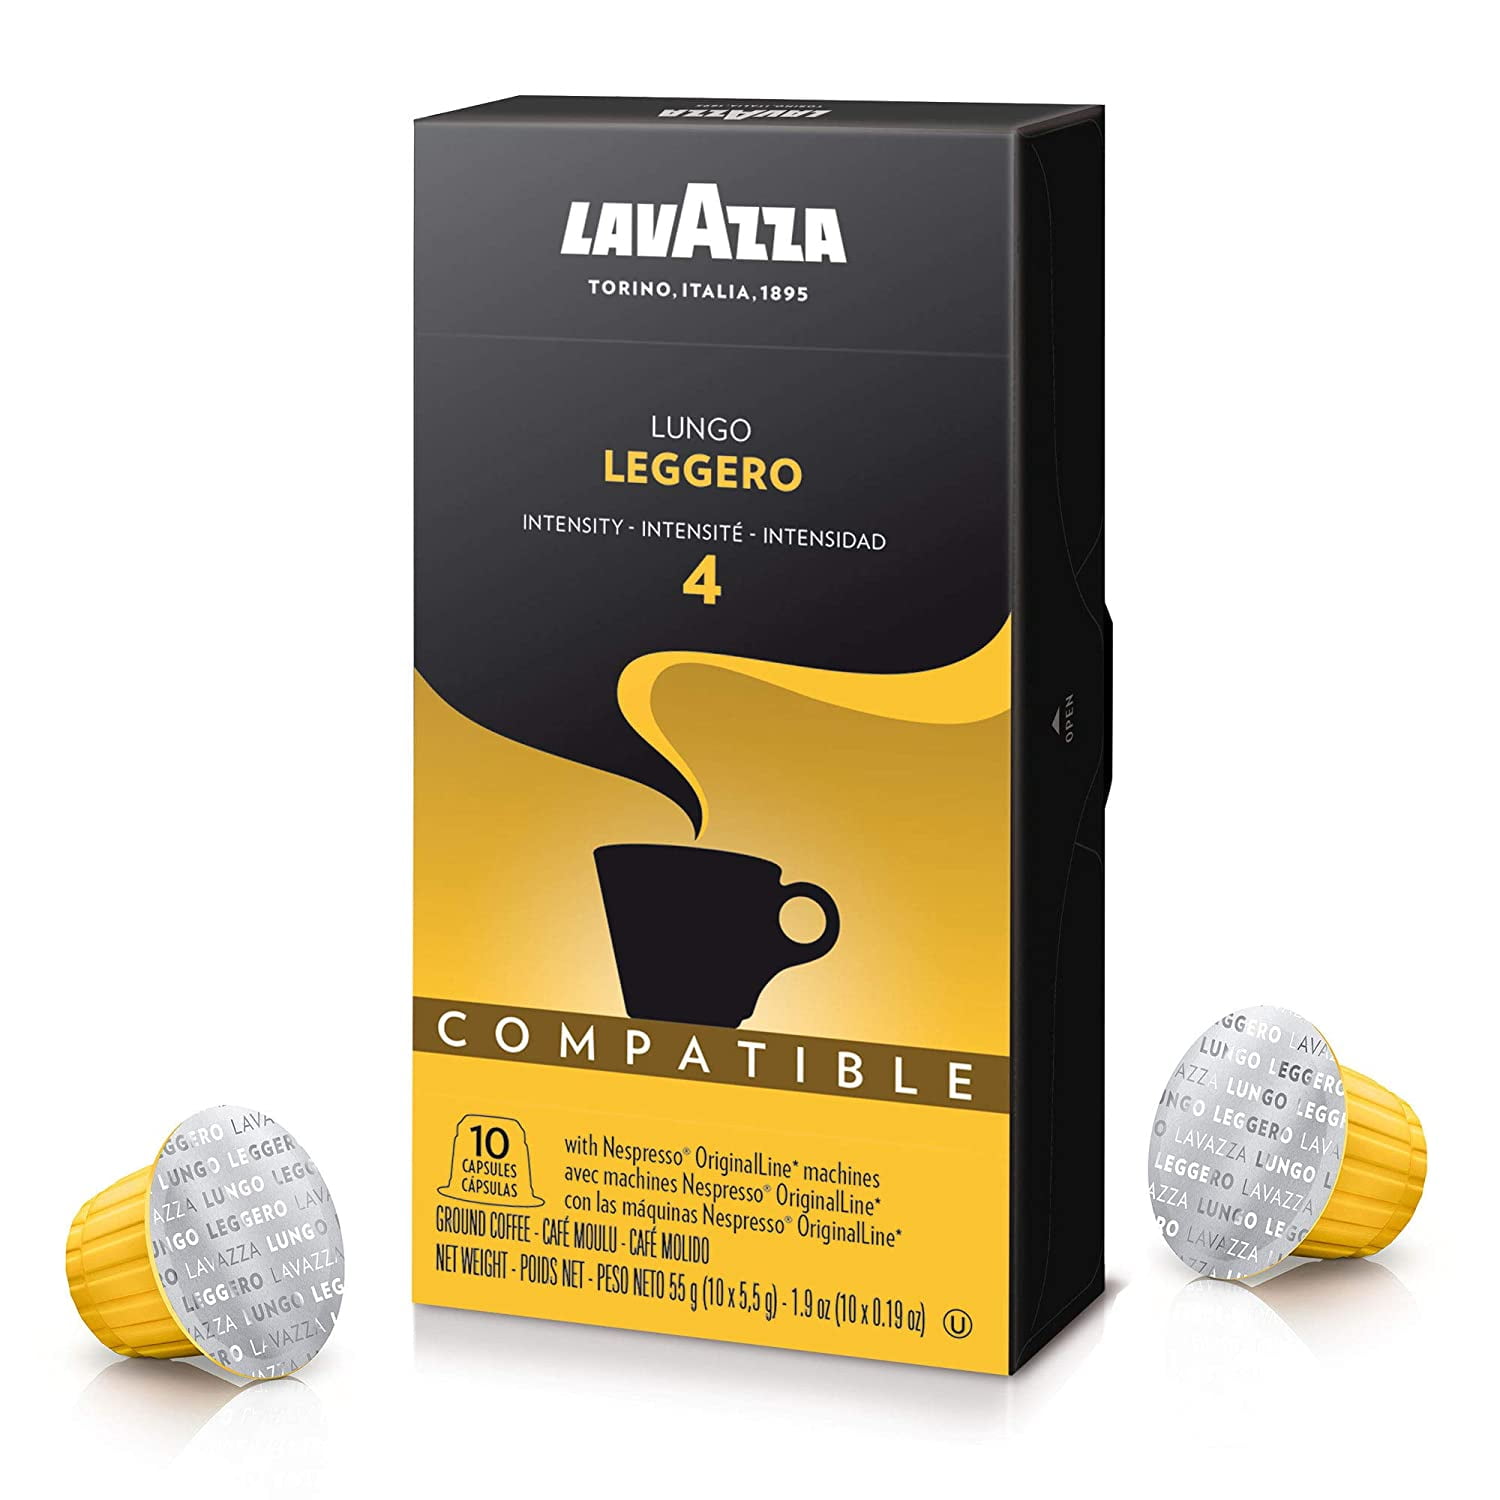 Lavazza Variety Pack - Capsules Compatible with Nespresso Original machines